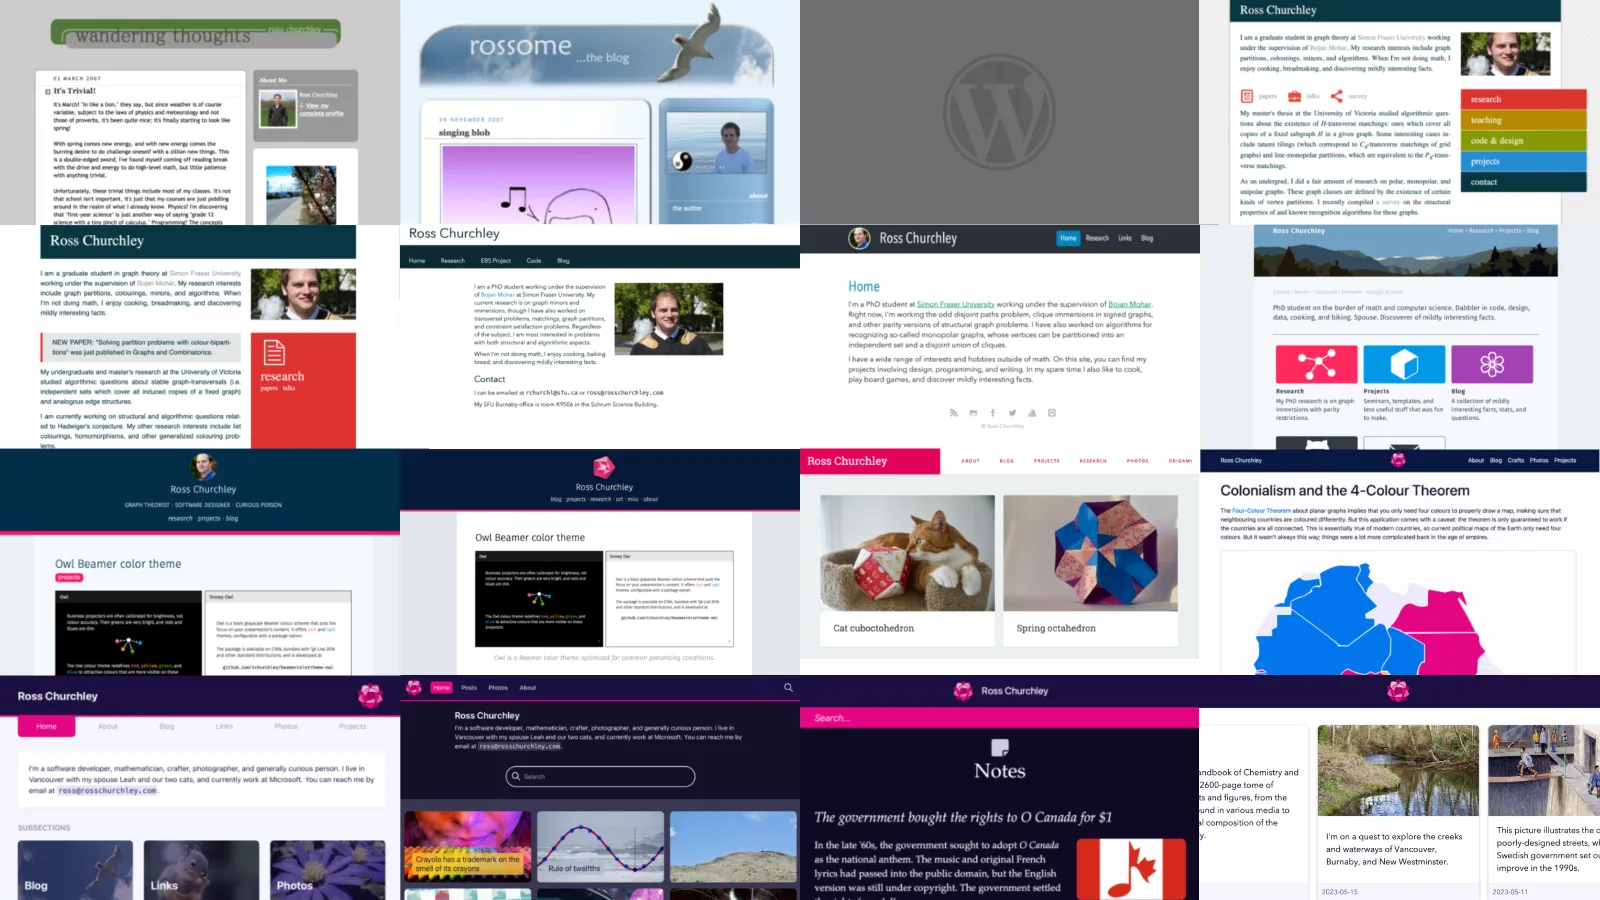 A 4-by-4 grid of screenshots of previous versions of this website.